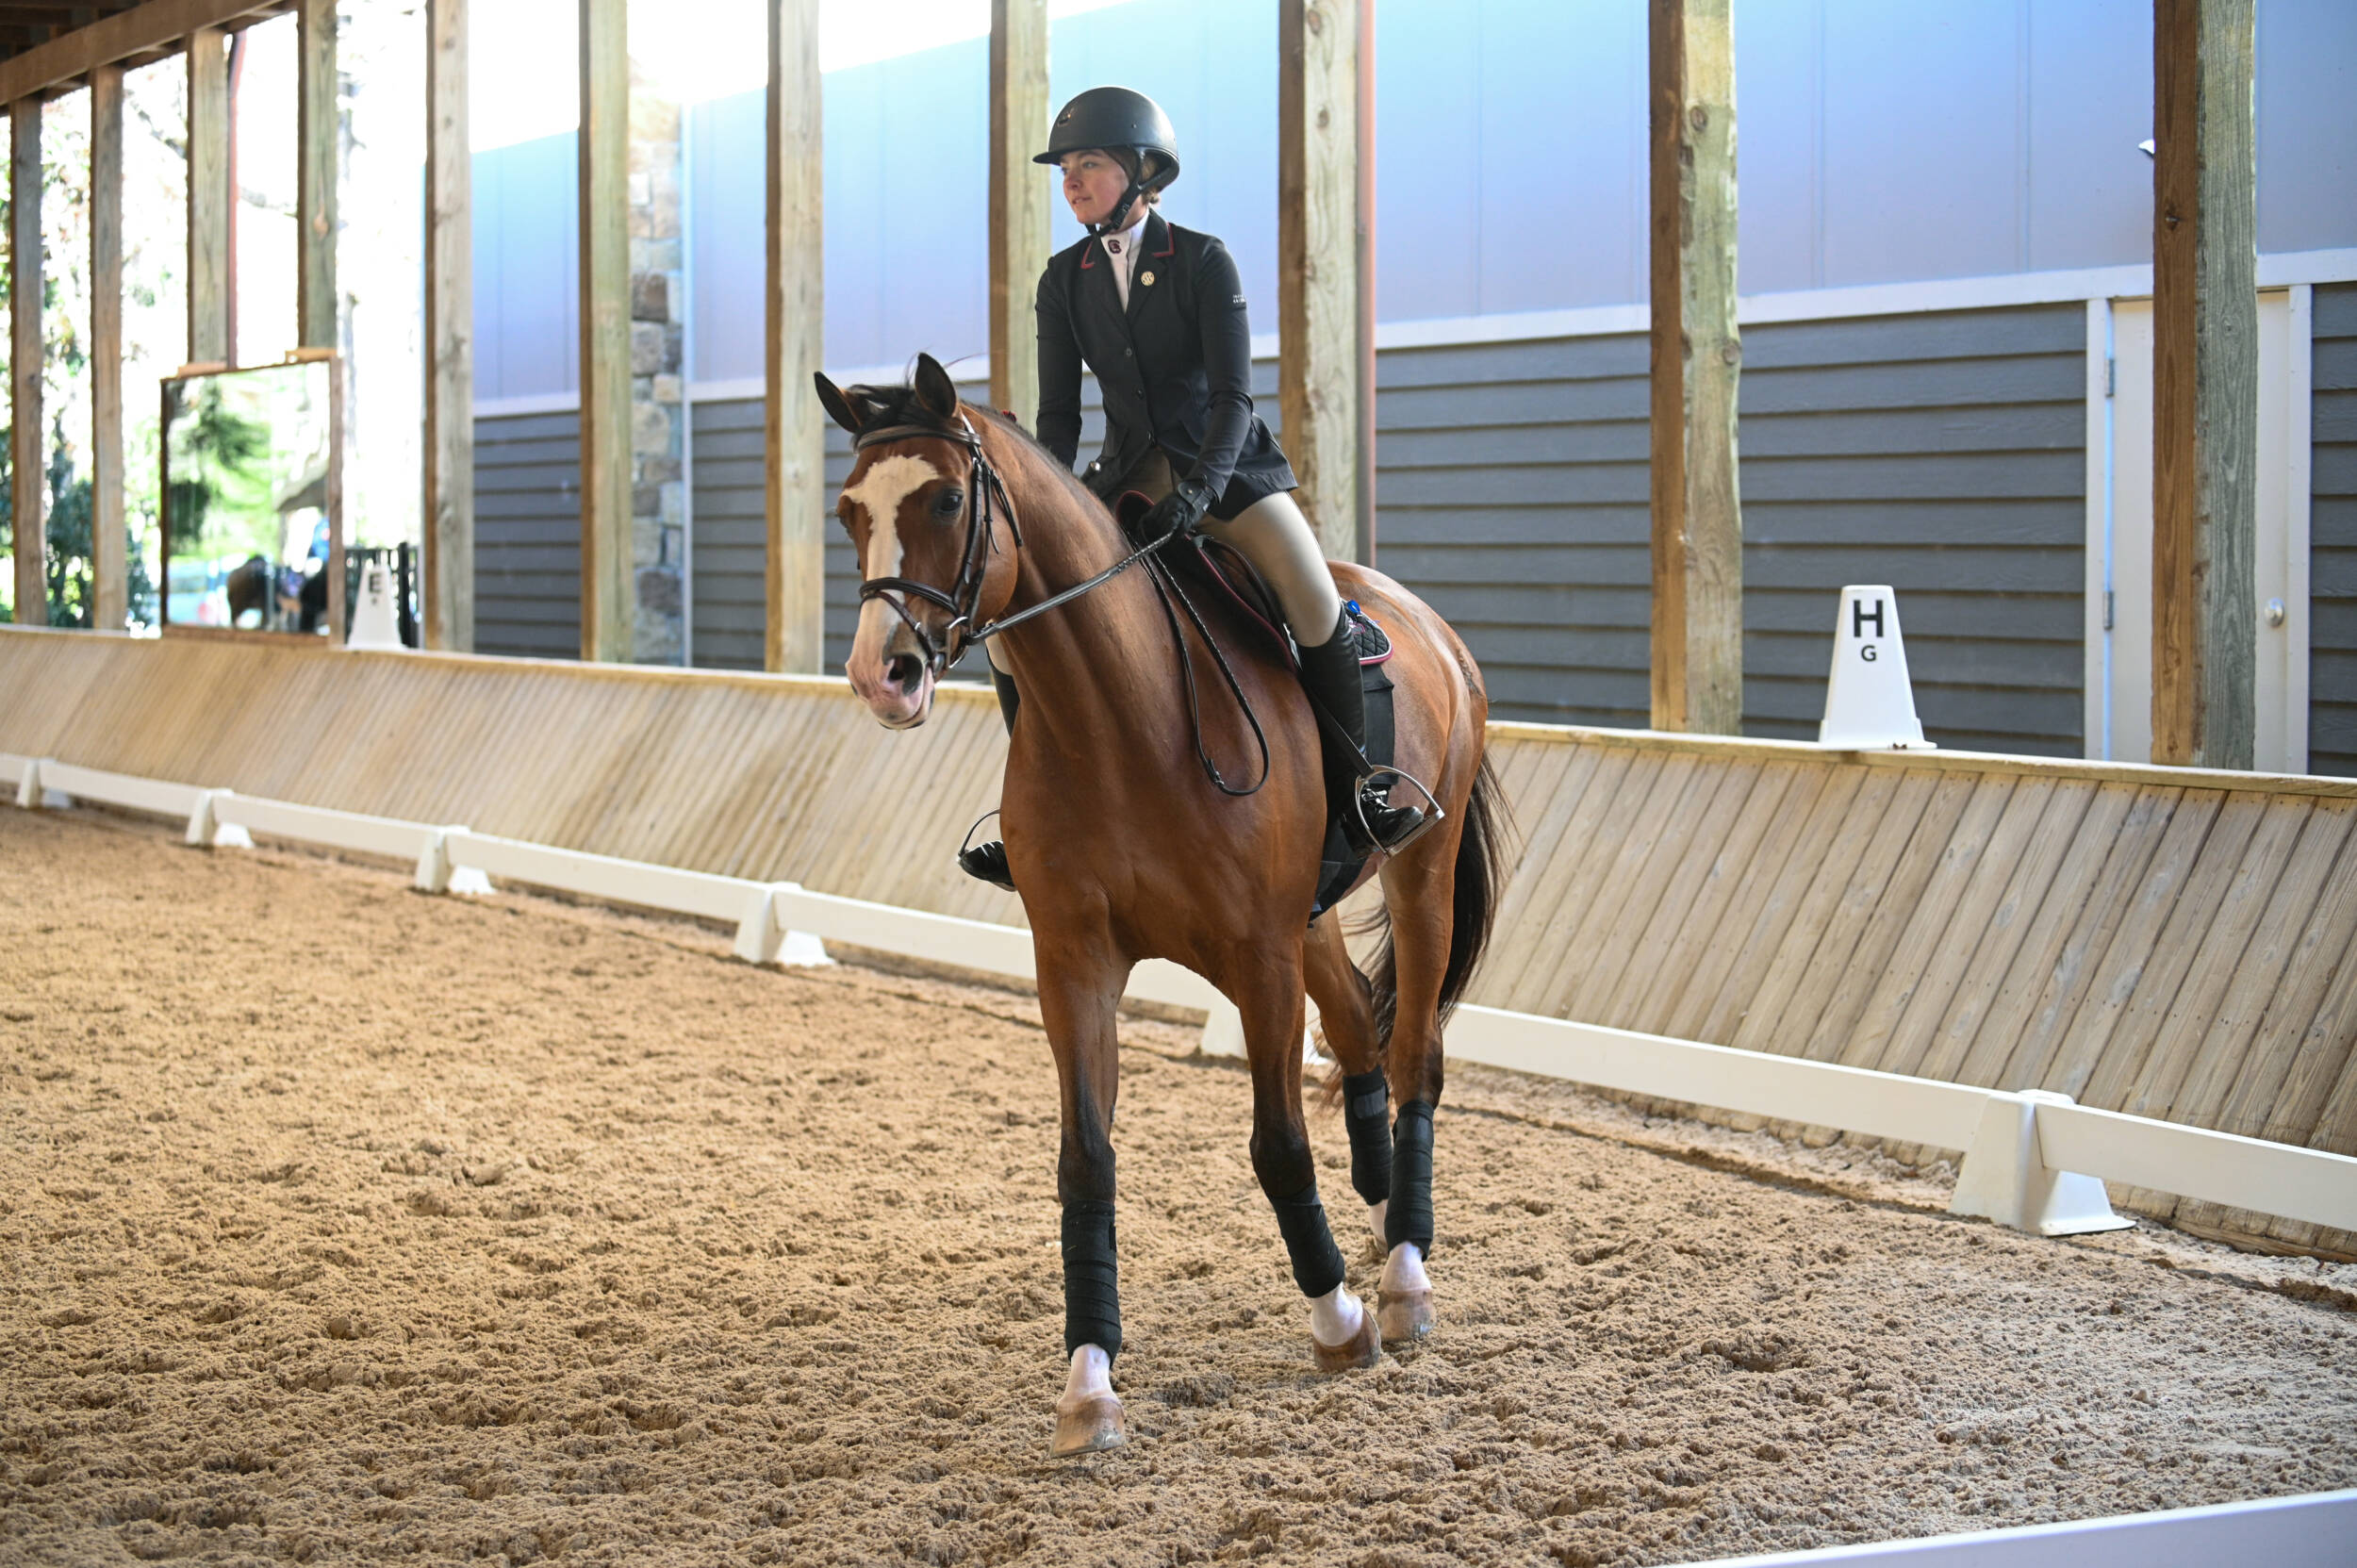 Maya Clarkson Named NCEA Rider of the Month